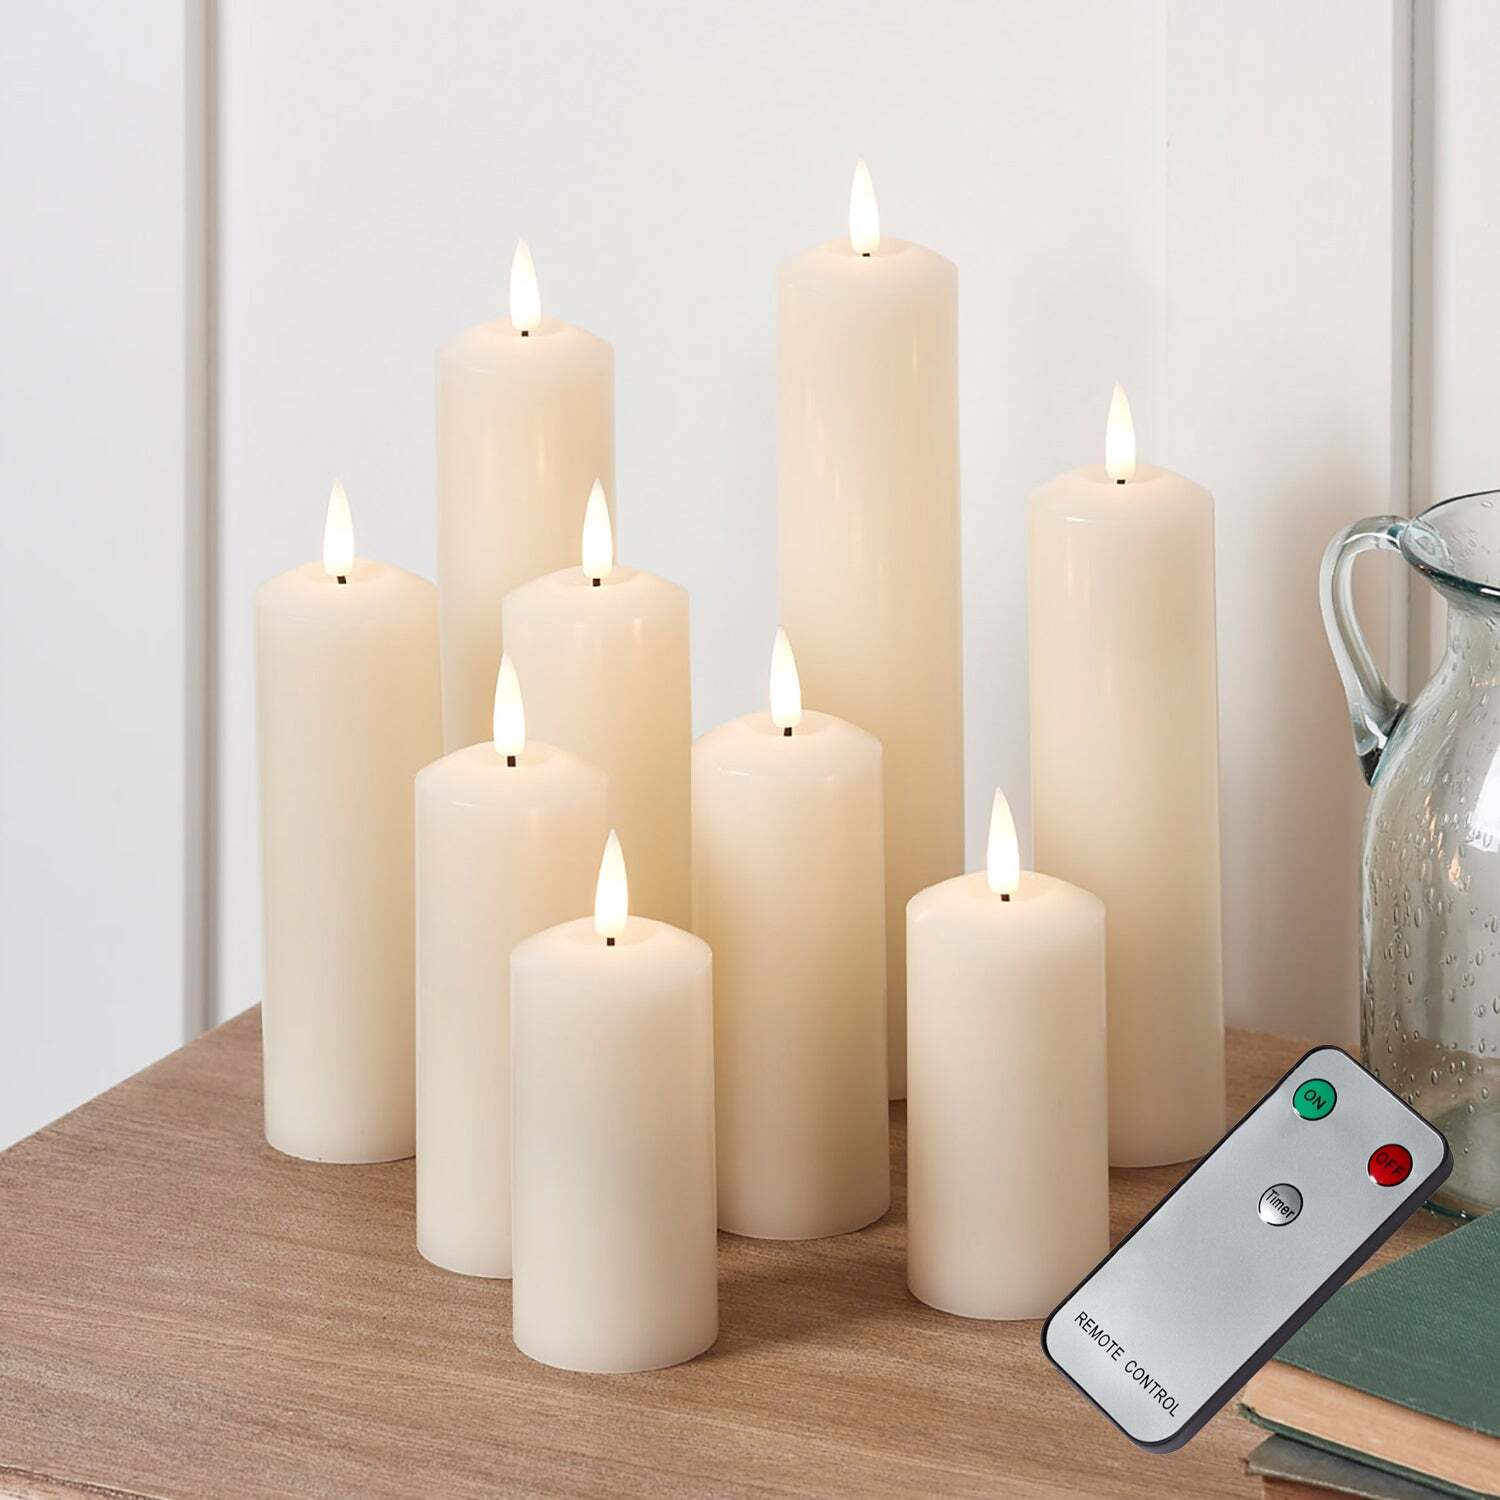 9 TruGlow® Ivory LED Slim Pillar Candles With Remote Control - image 1